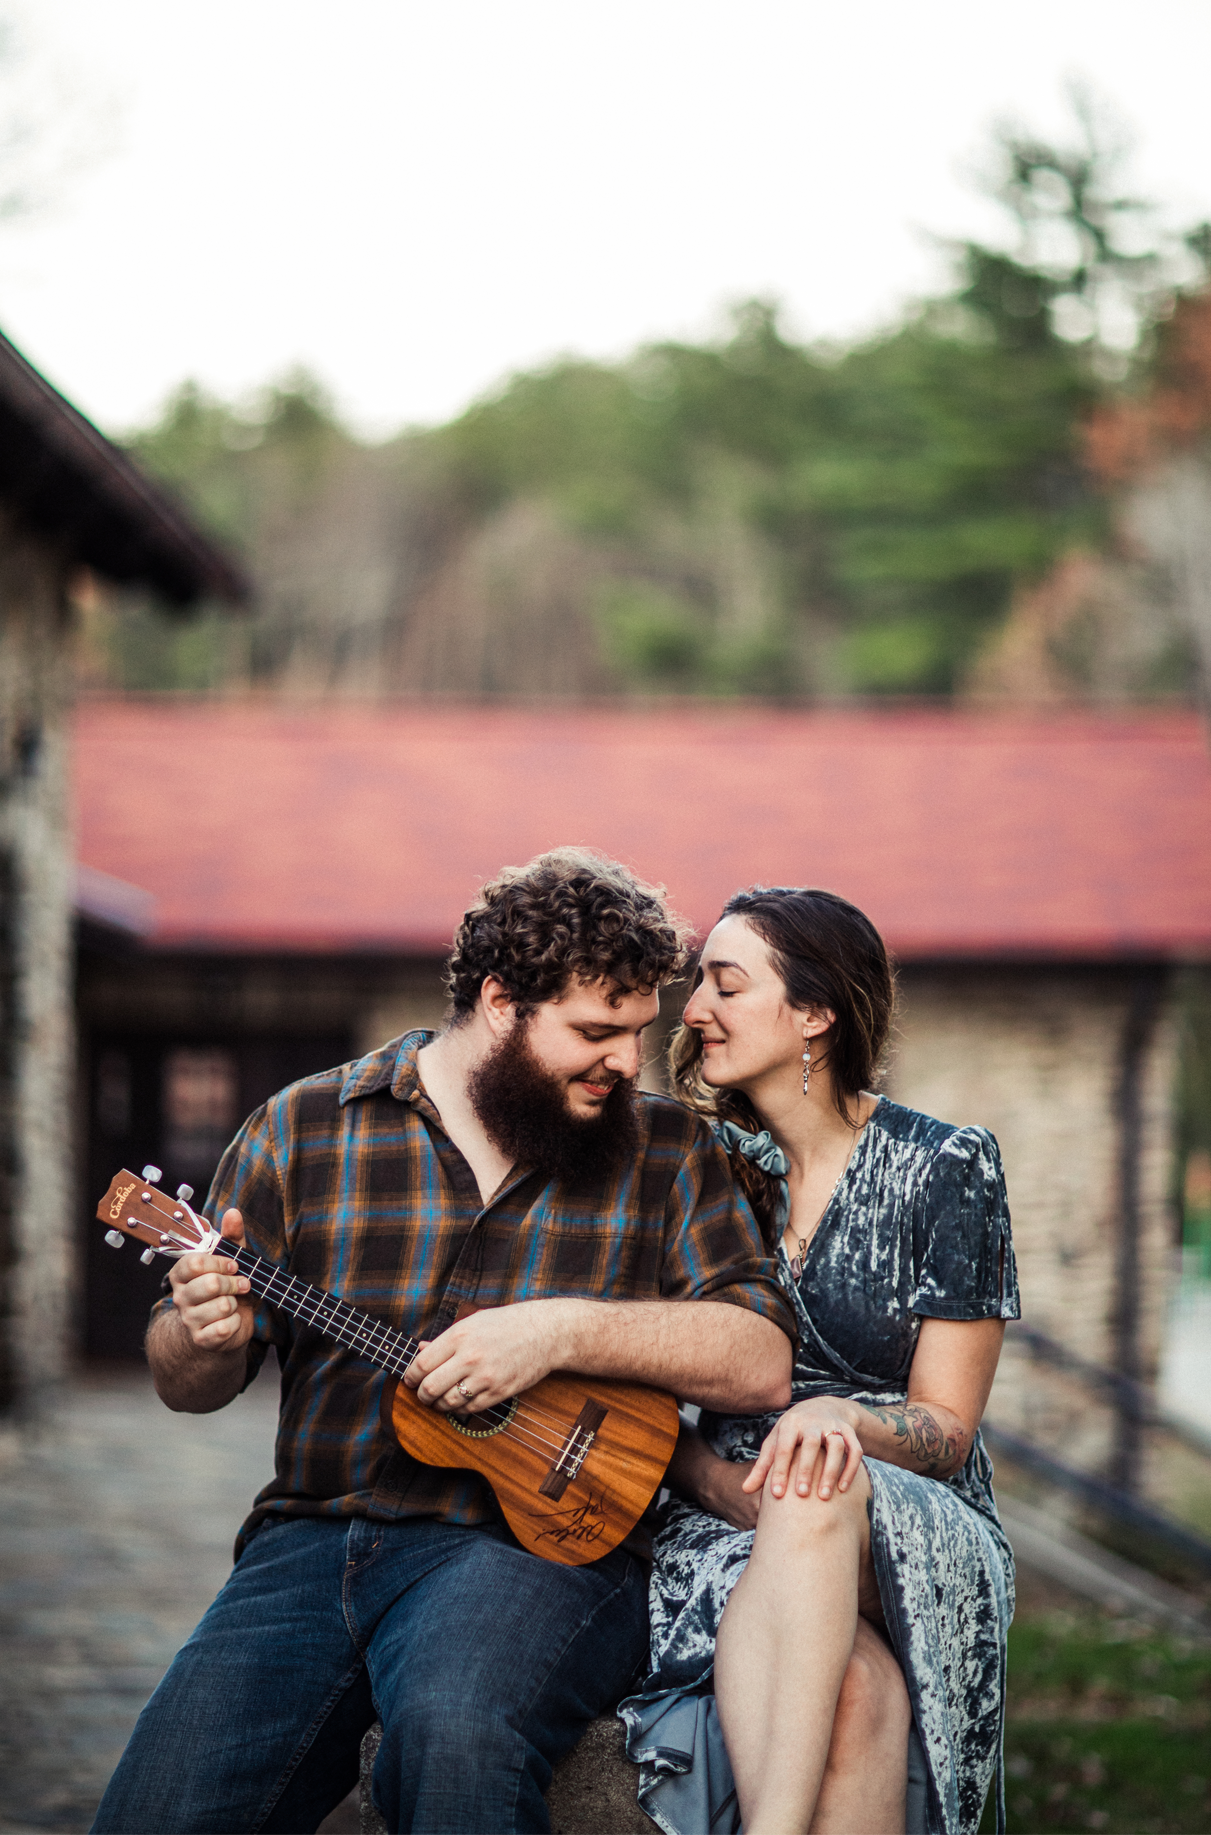 Woman listens while man plays ukulele next to her during engagement session